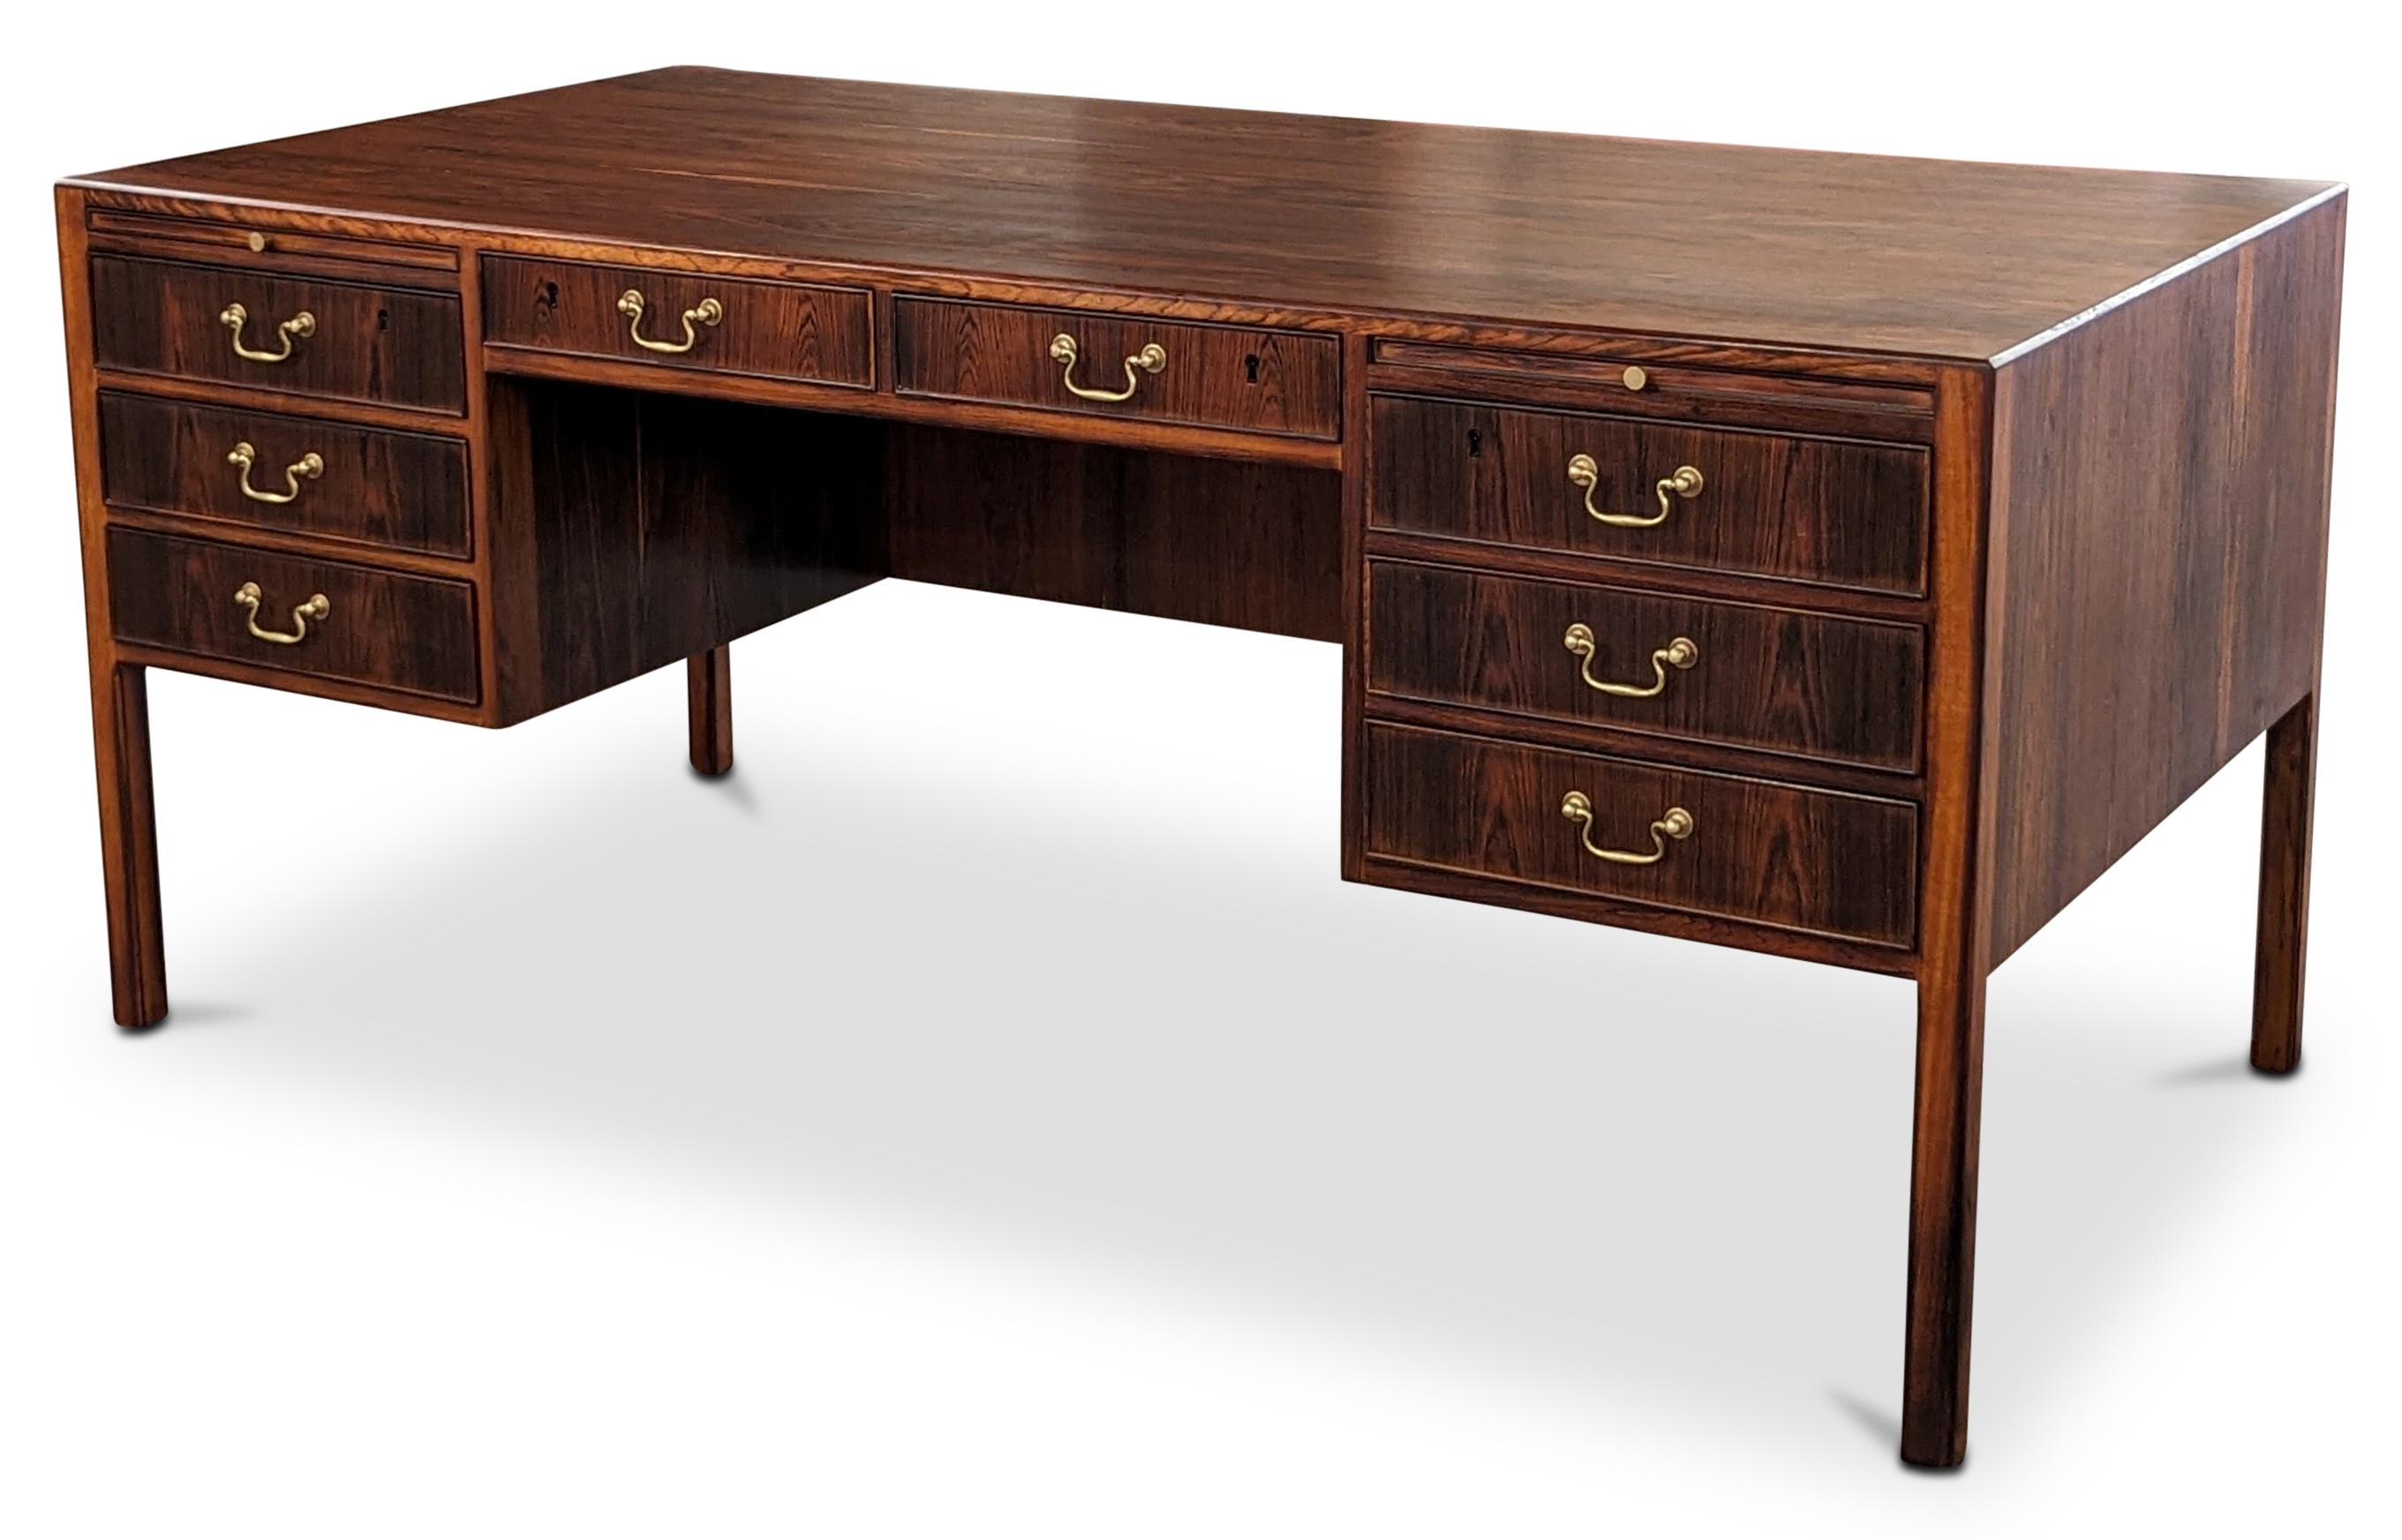 Ole Wancher Rosewood Desk - 0823177 Vintage Danish Mid Century In Good Condition For Sale In Jersey City, NJ